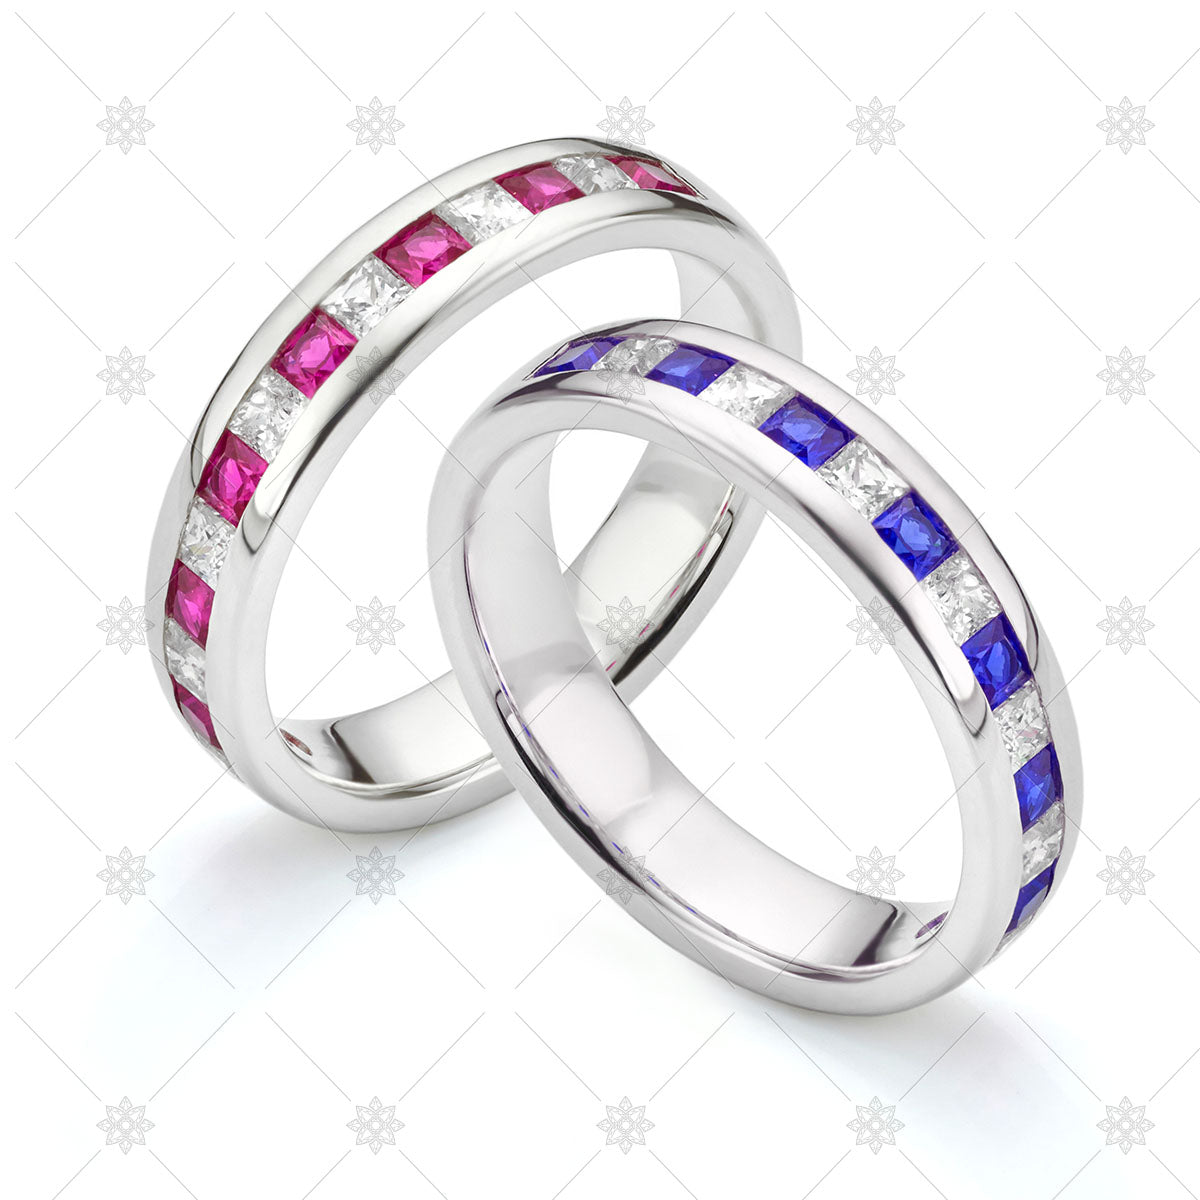 Blue and Pink Sapphire Wedding Rings stock image